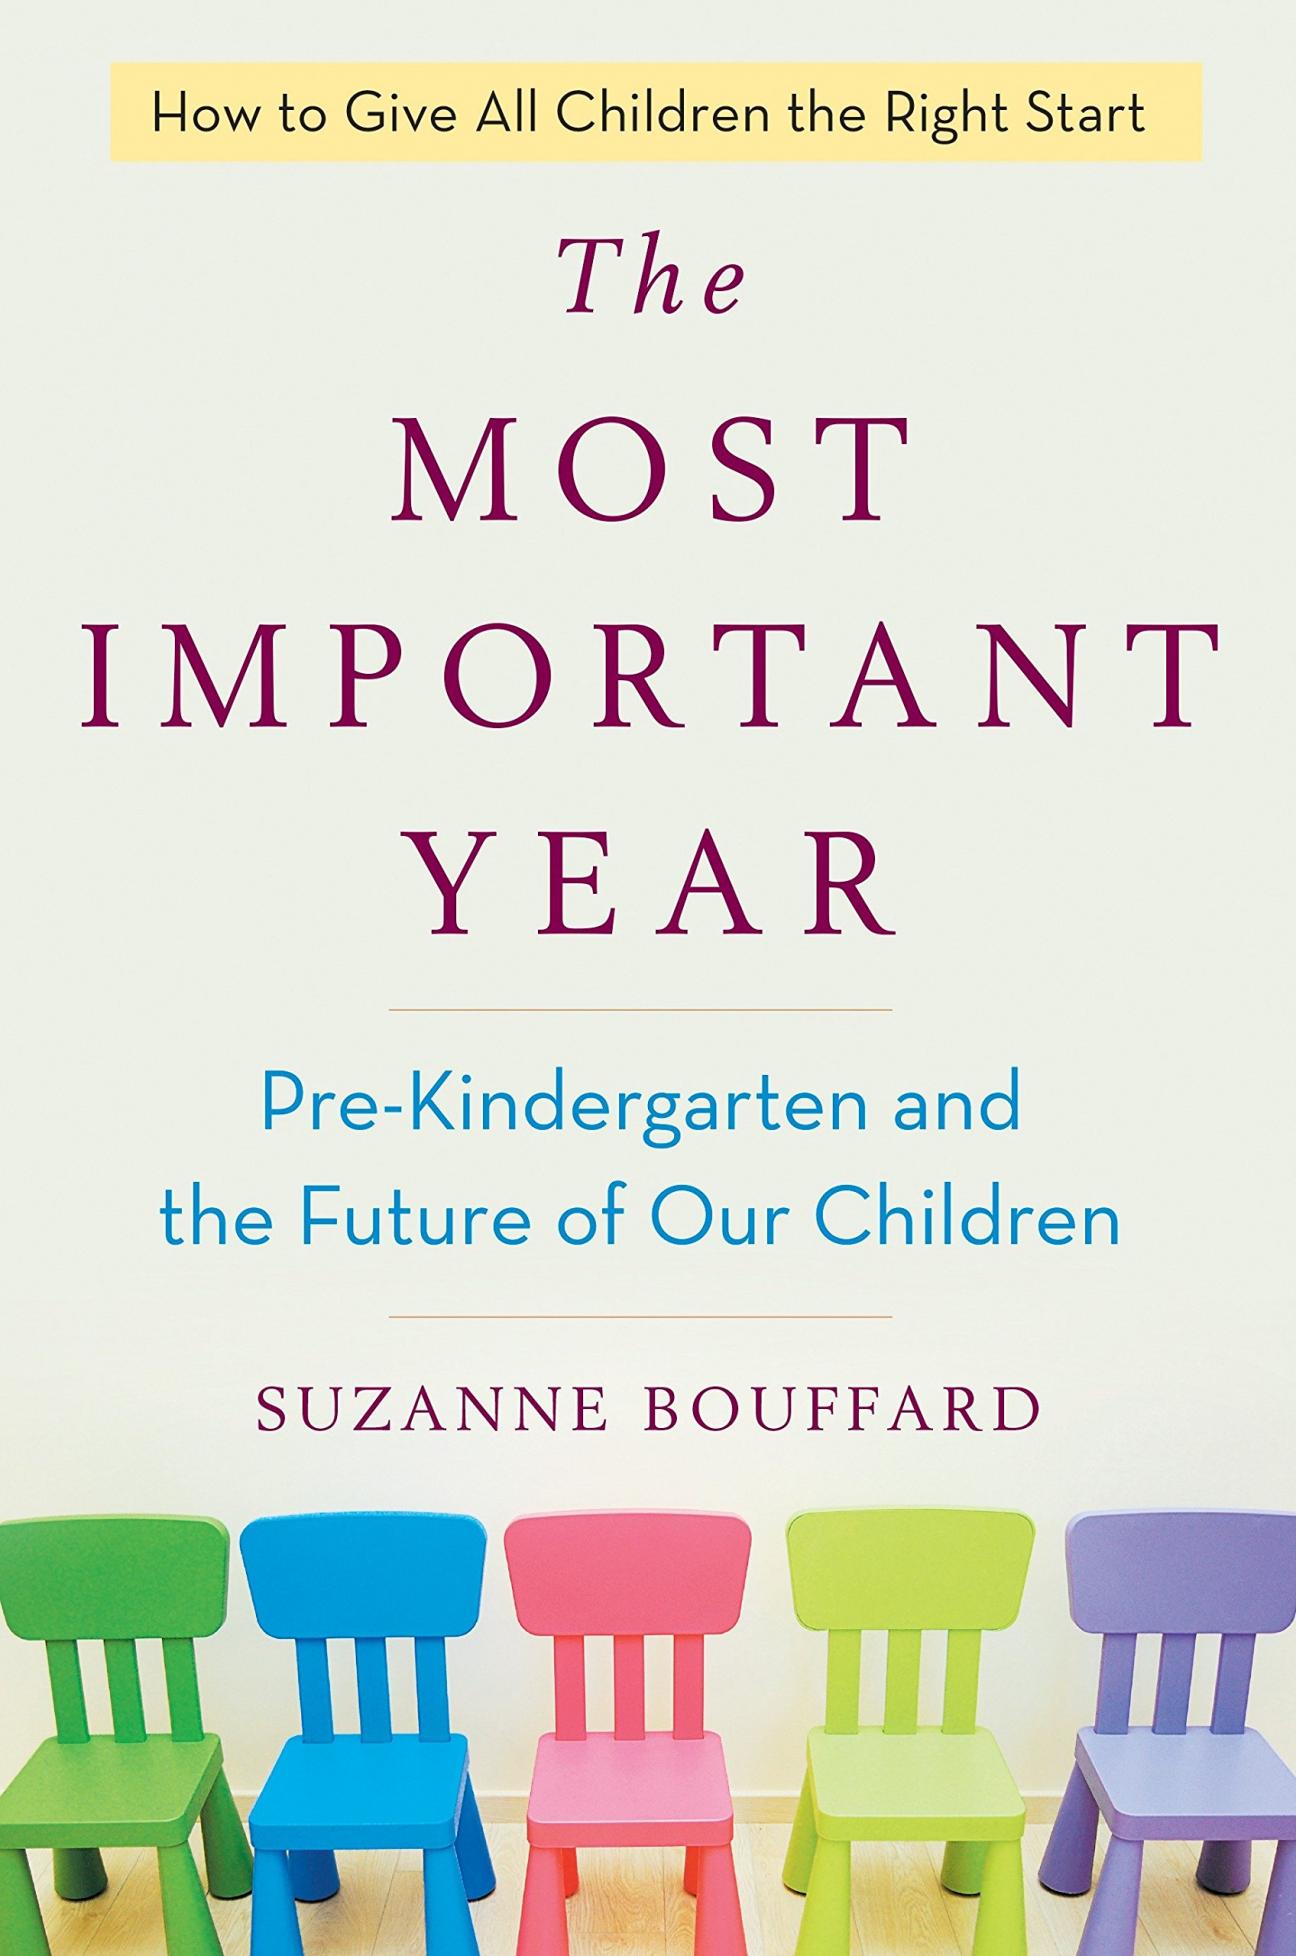 Book cover of colorful chairs and the title "The most important year: pre-kindergarten and the future of our children"